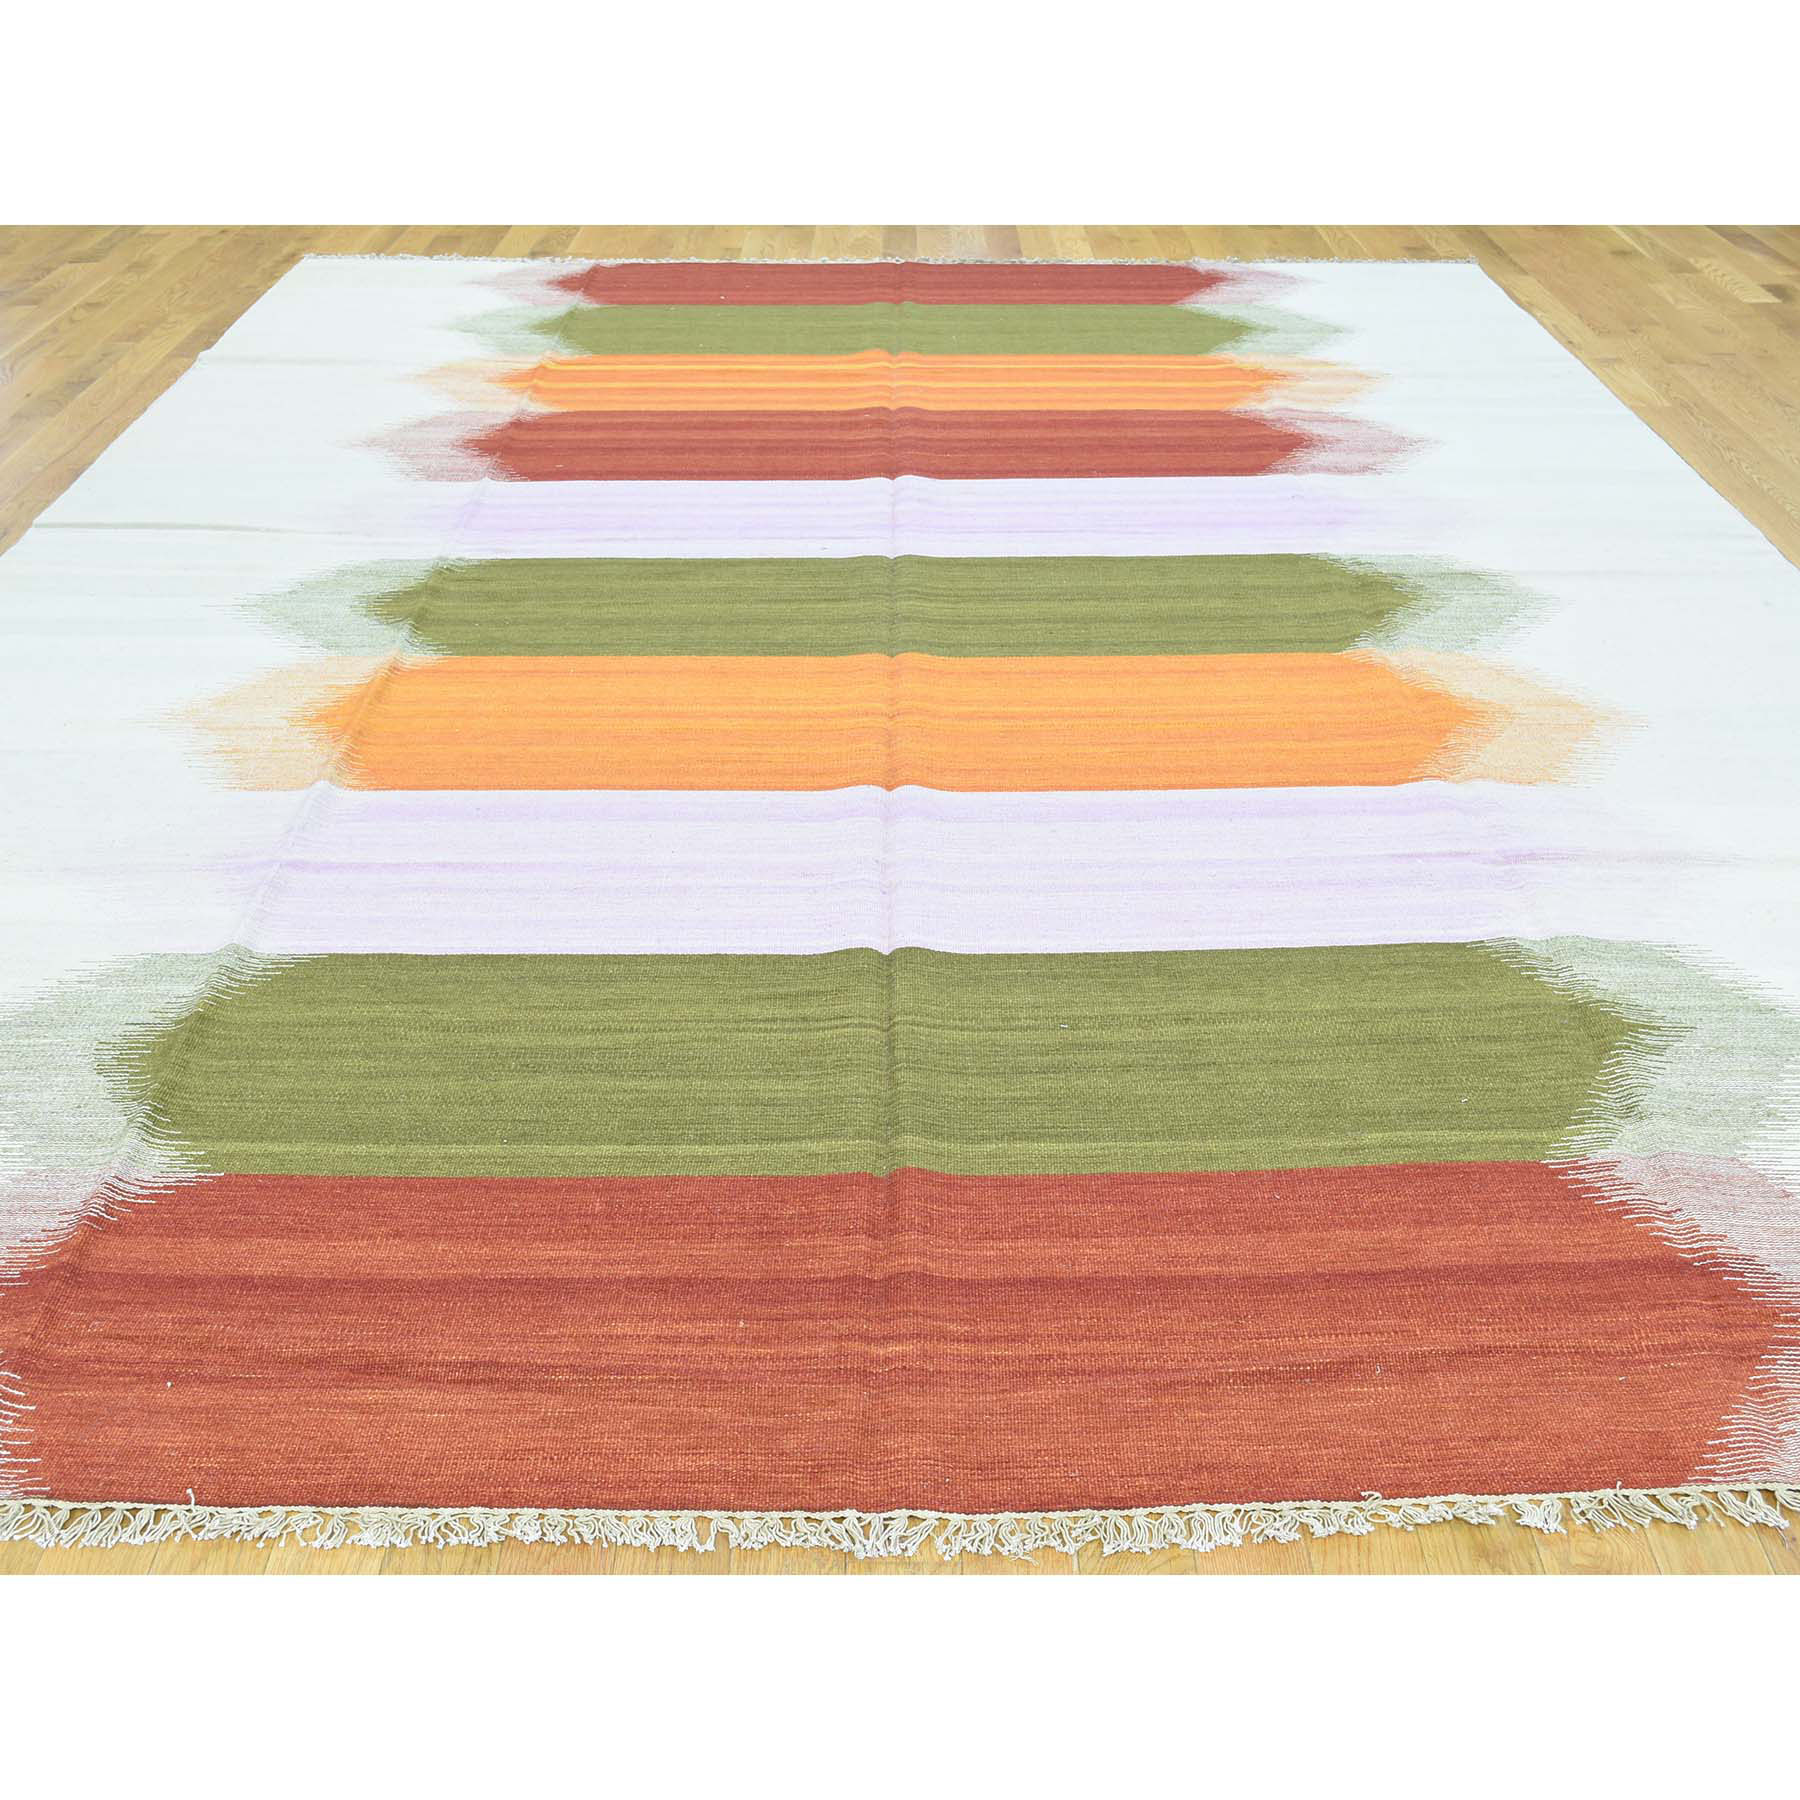 9'x12'7" Flat Weave Reversible Durie Kilim Colorful Hand-Woven Carpet 